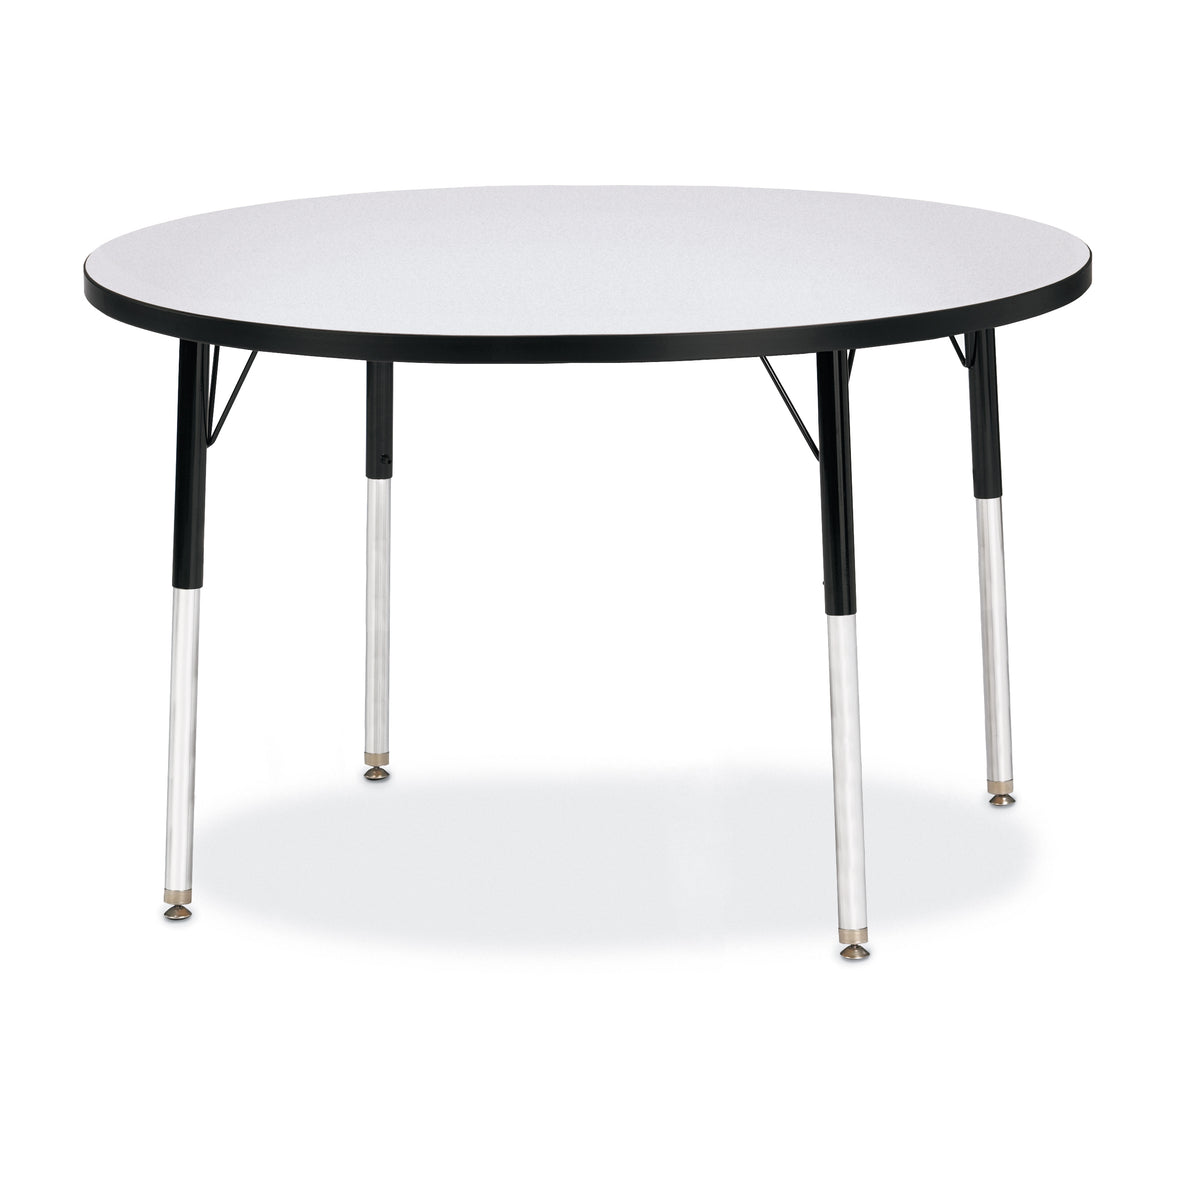 6468JCA180, Berries Round Activity Table - 42" Diameter, A-height - Freckled Gray/Black/Black